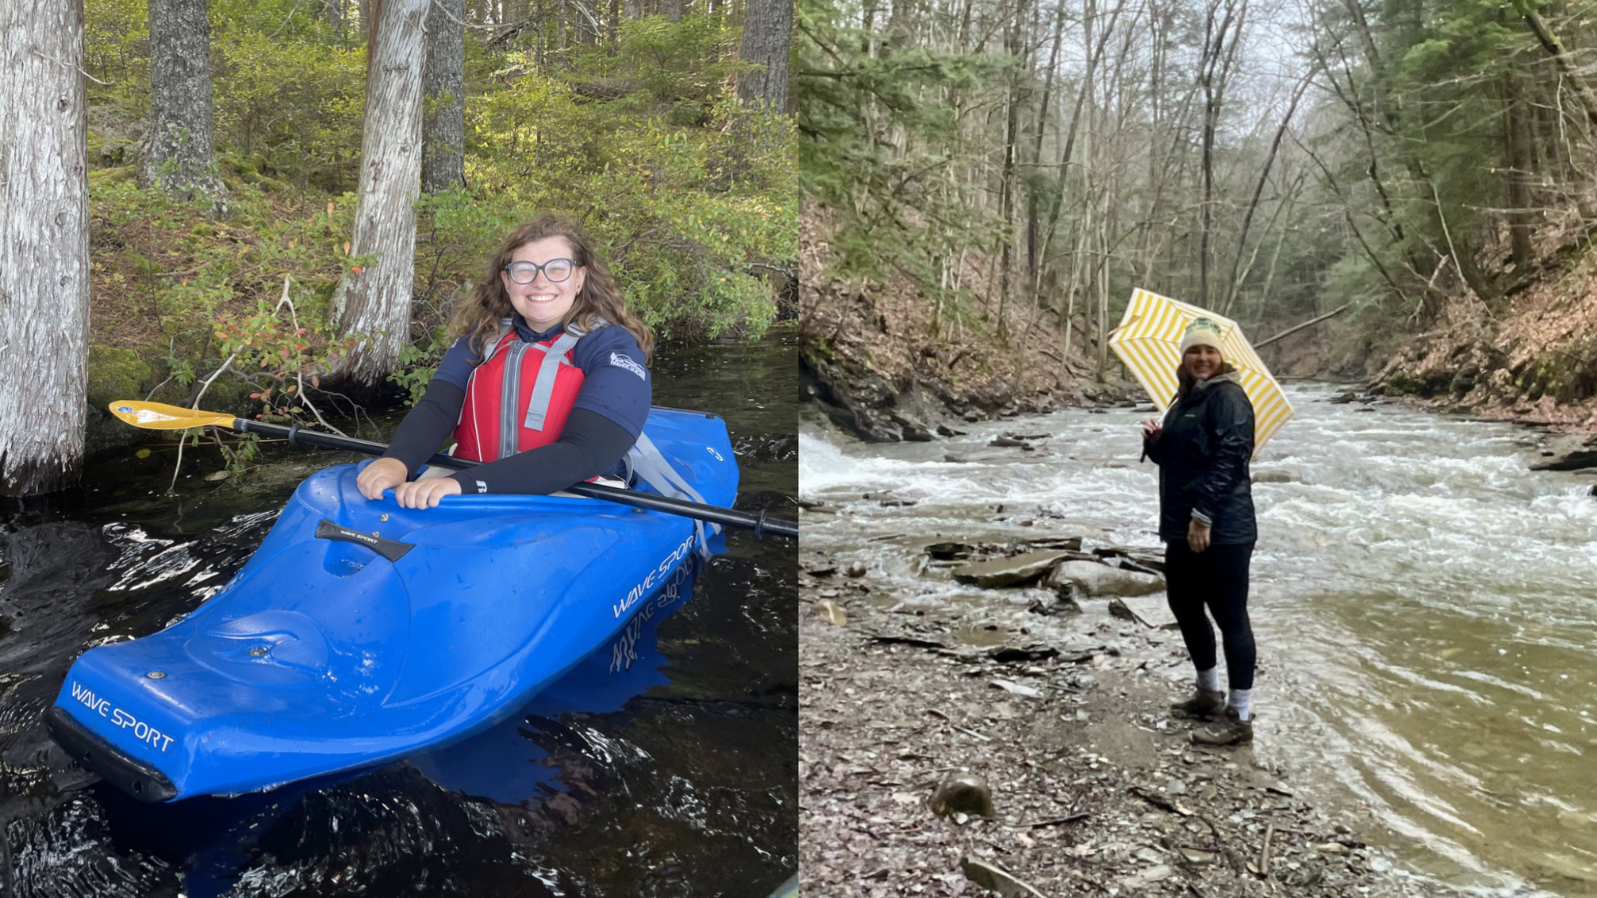 Two photos side by side. The left photo features Amanda Ives in a blue kayak in a stream. The right photo features Teresa Pietrusinski standing on the bank of a river in the rain with an umbrella.